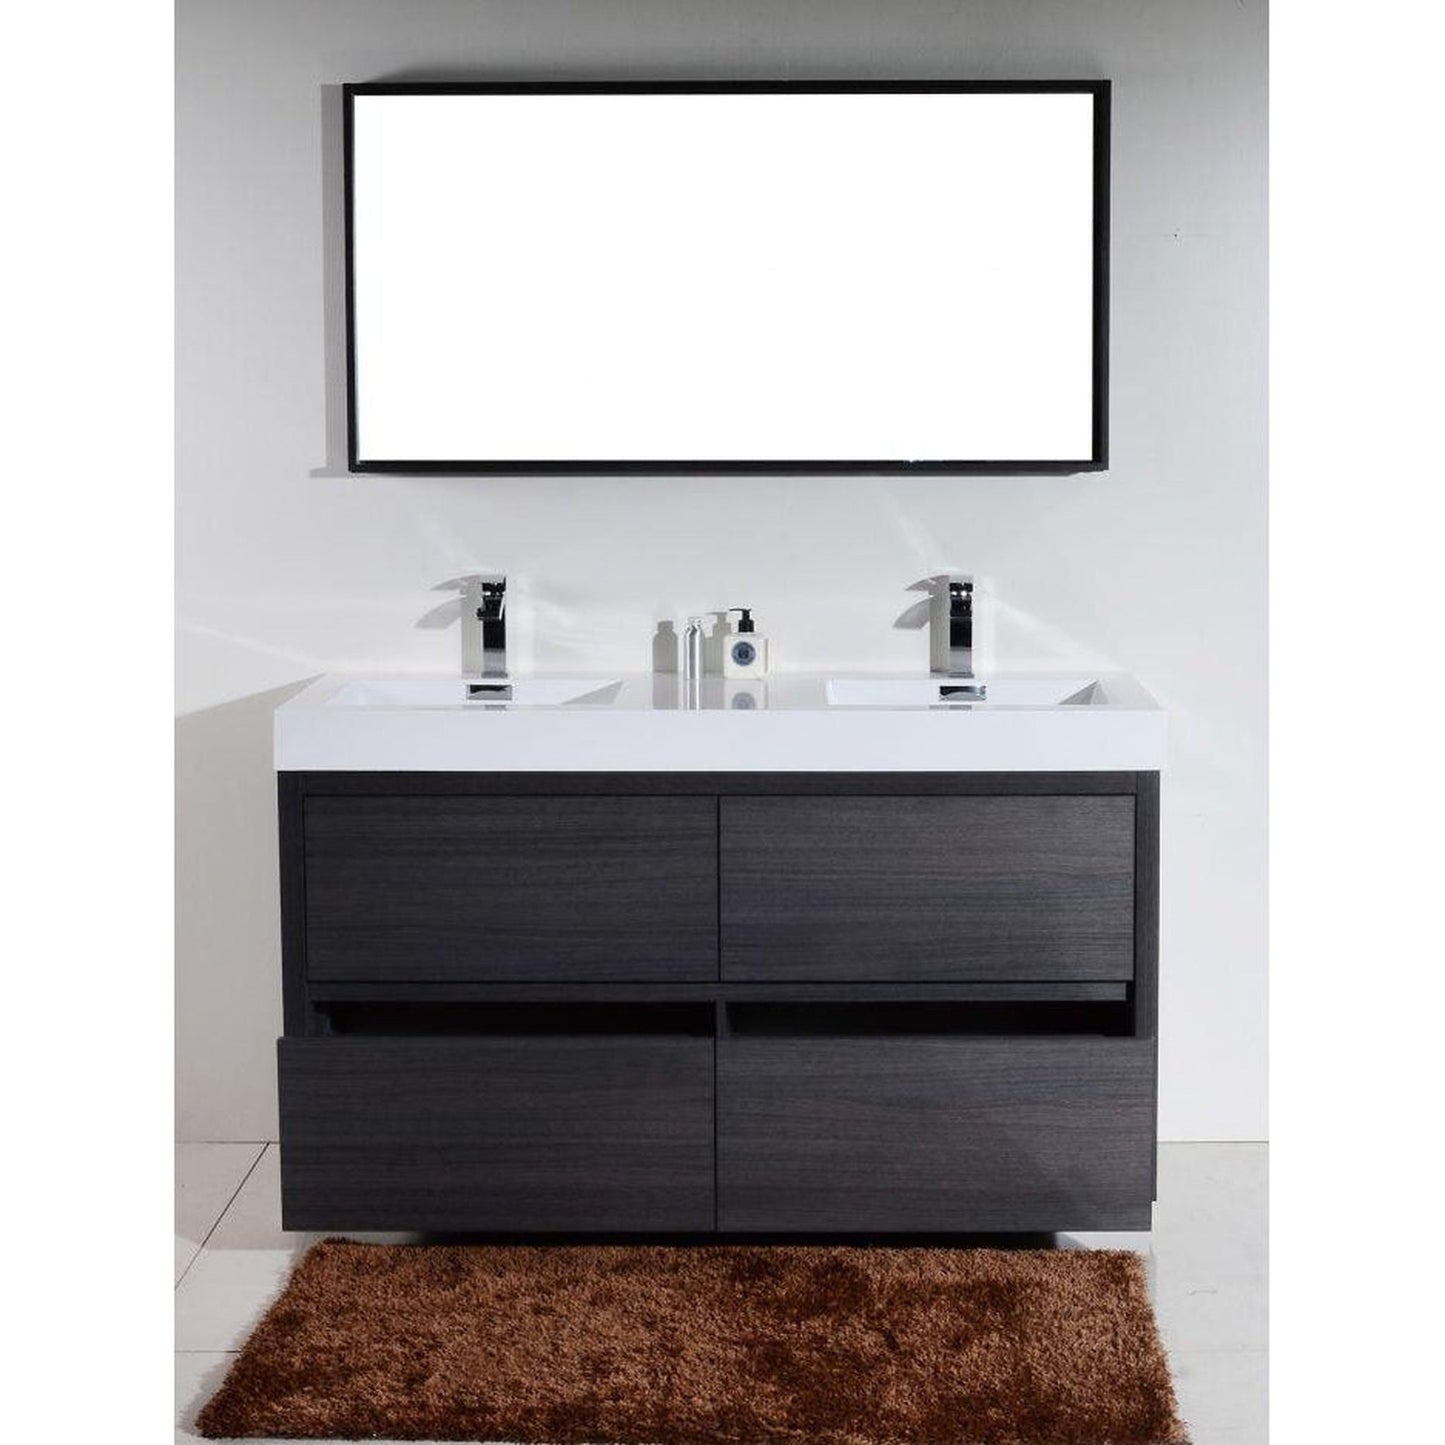 KubeBath Bliss 60" Gray Oak Freestanding Modern Bathroom Vanity With Double Integrated Acrylic Sink With Overflow and 55" Gray Oak Framed Mirror With Shelf